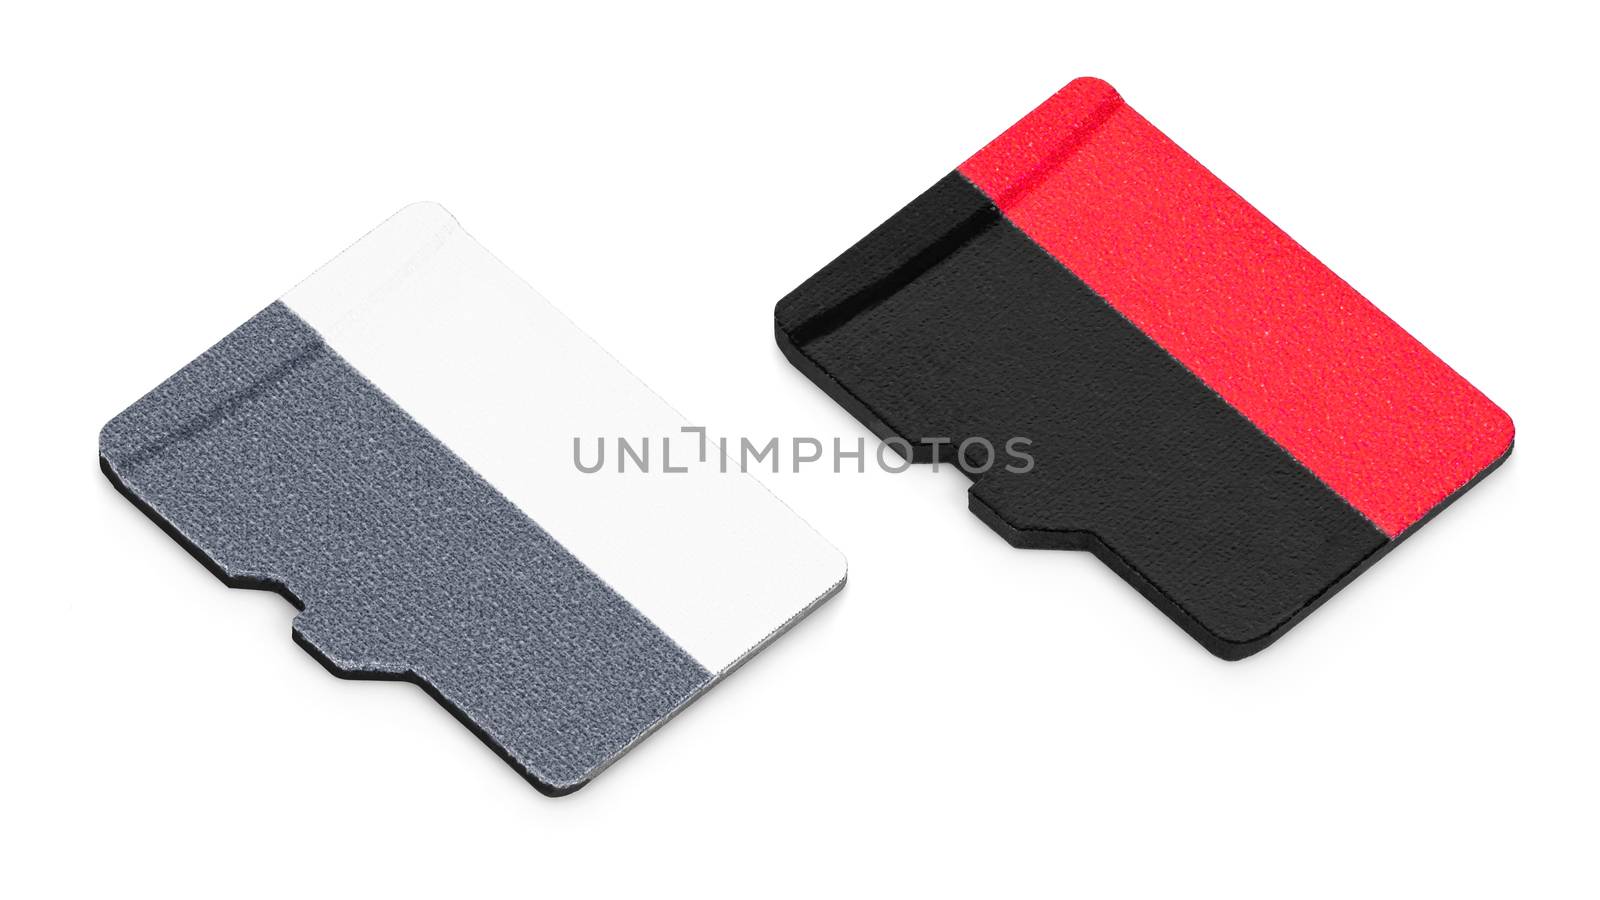 Two blank micro SD memory cards isolated on white background with clipping path